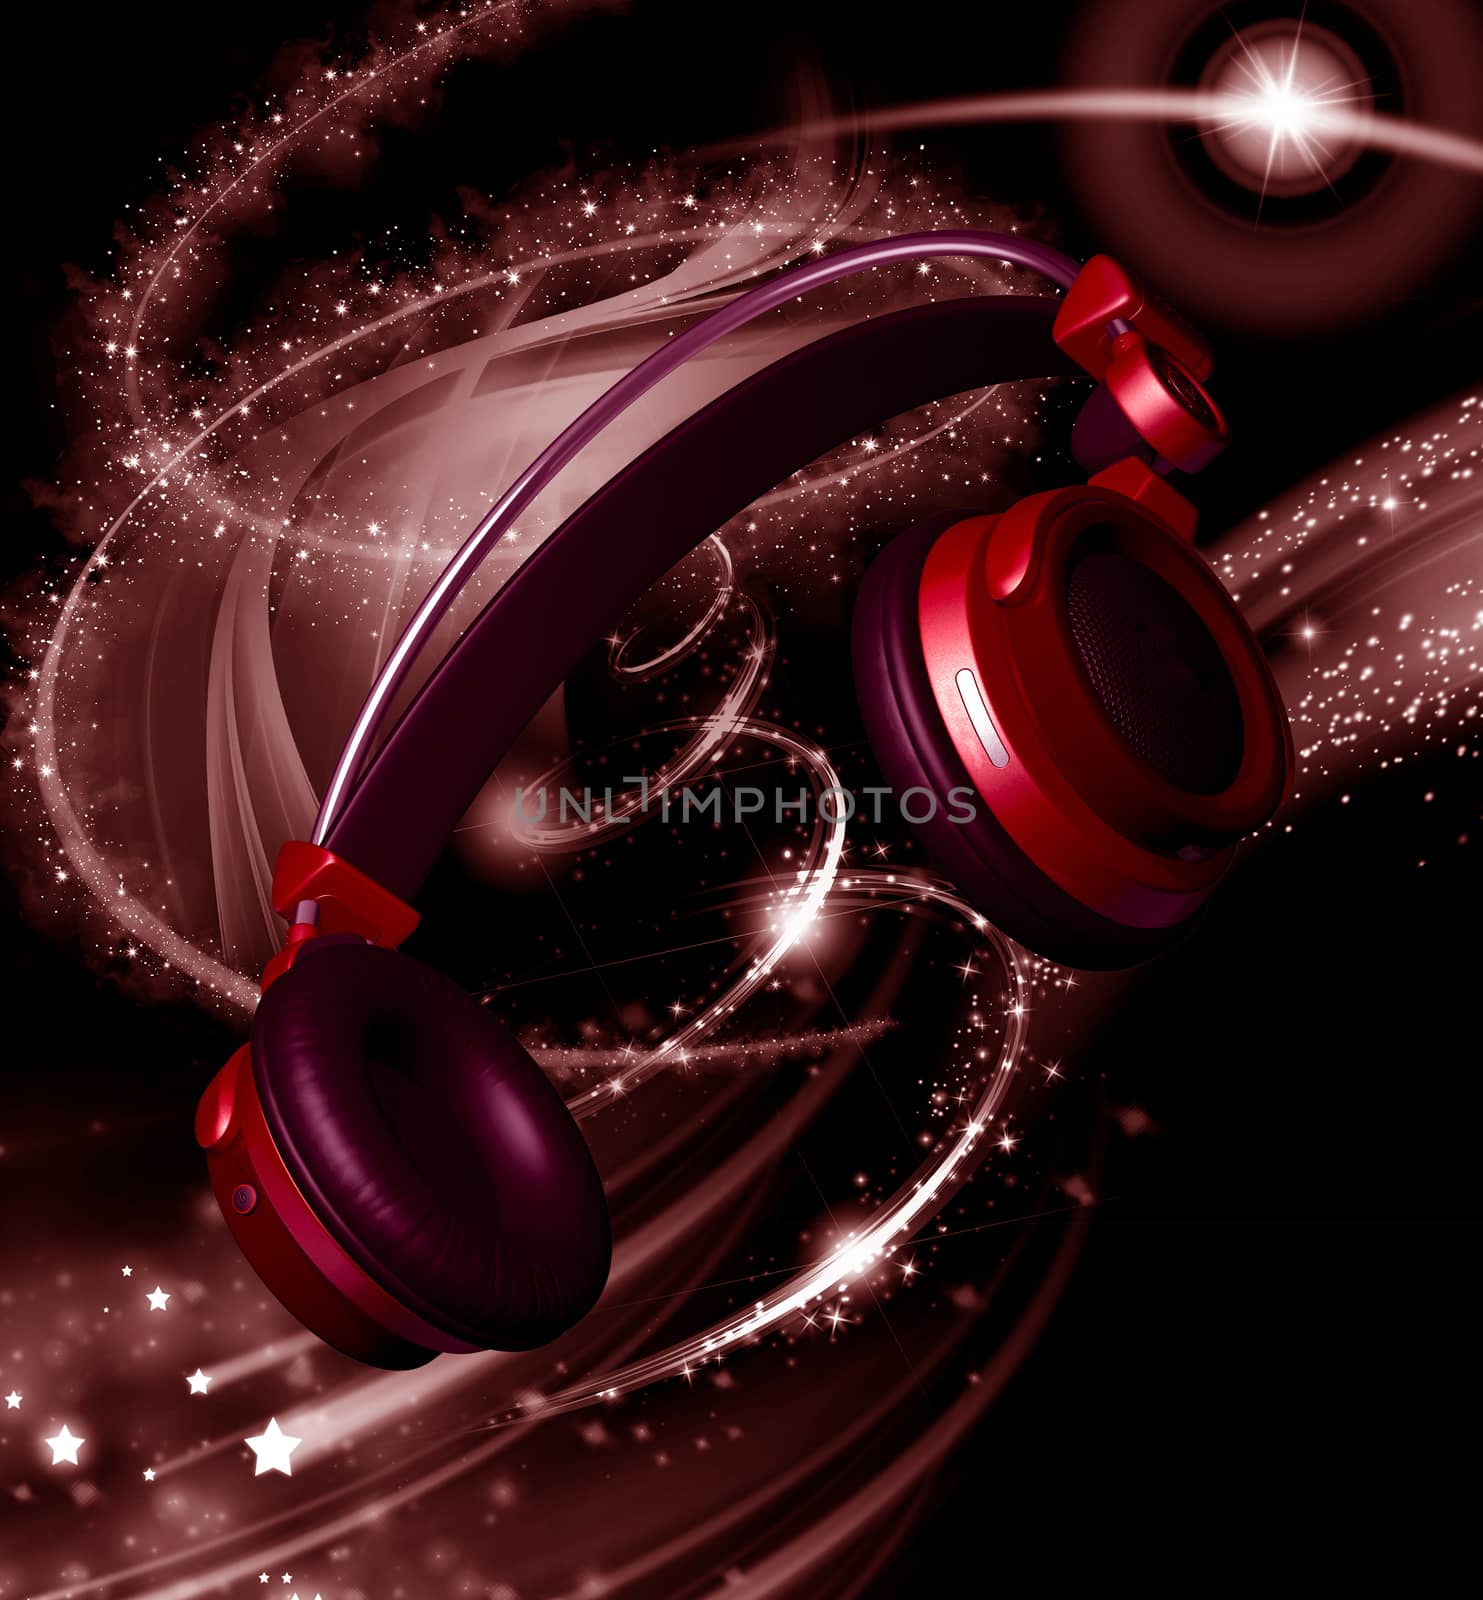 Realistic headphones with stars dust by ankarb